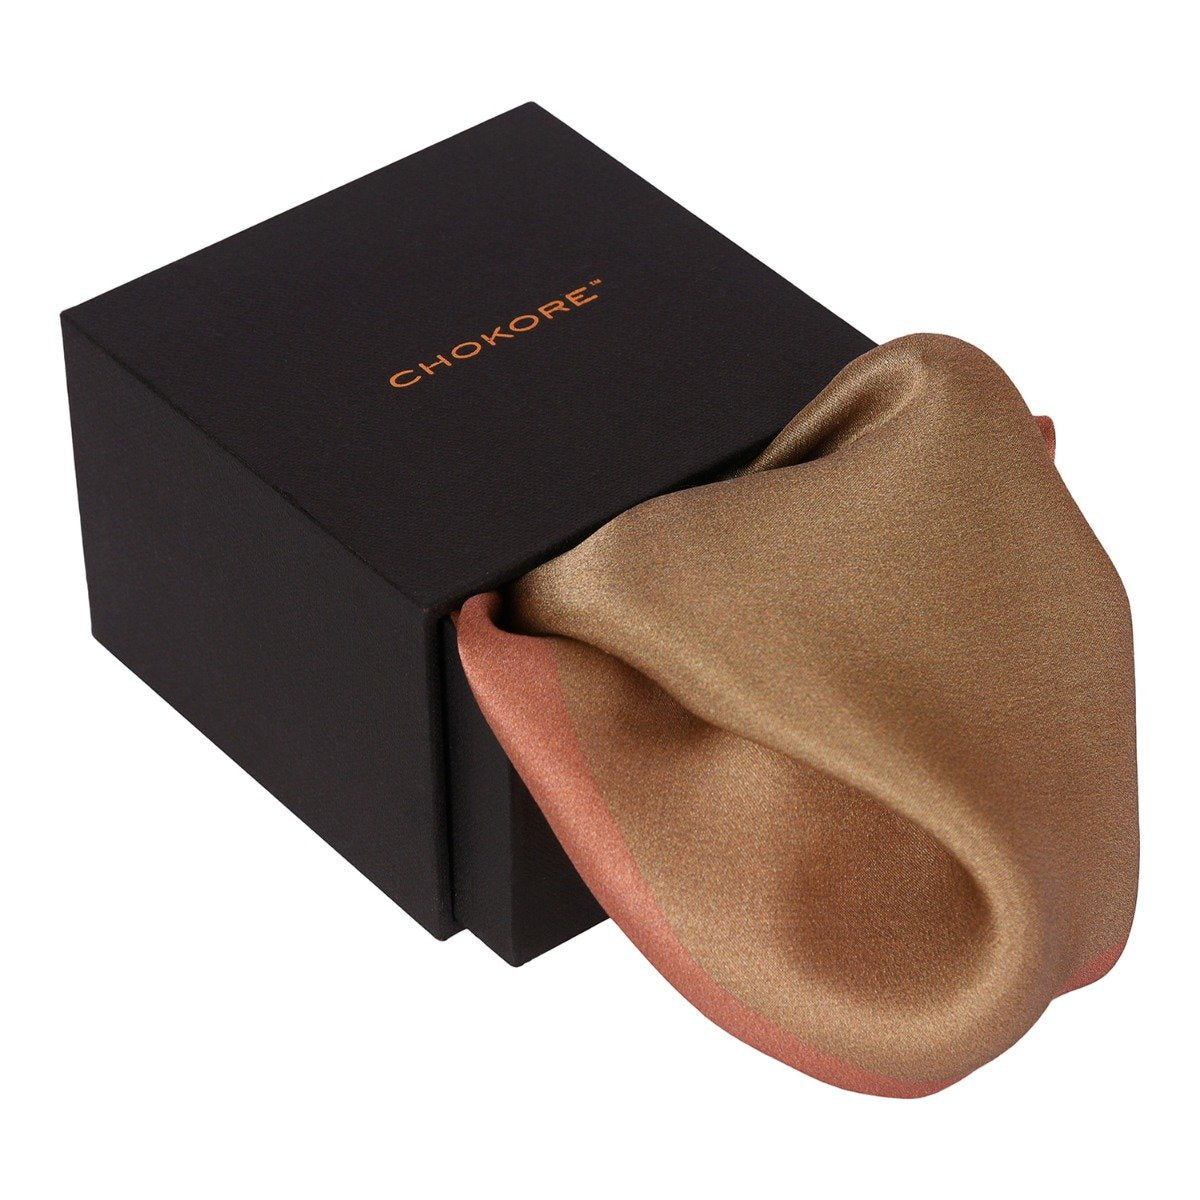 Chokore 2-in-1 Beige & Marsela Silk Pocket Square from the Solids Line